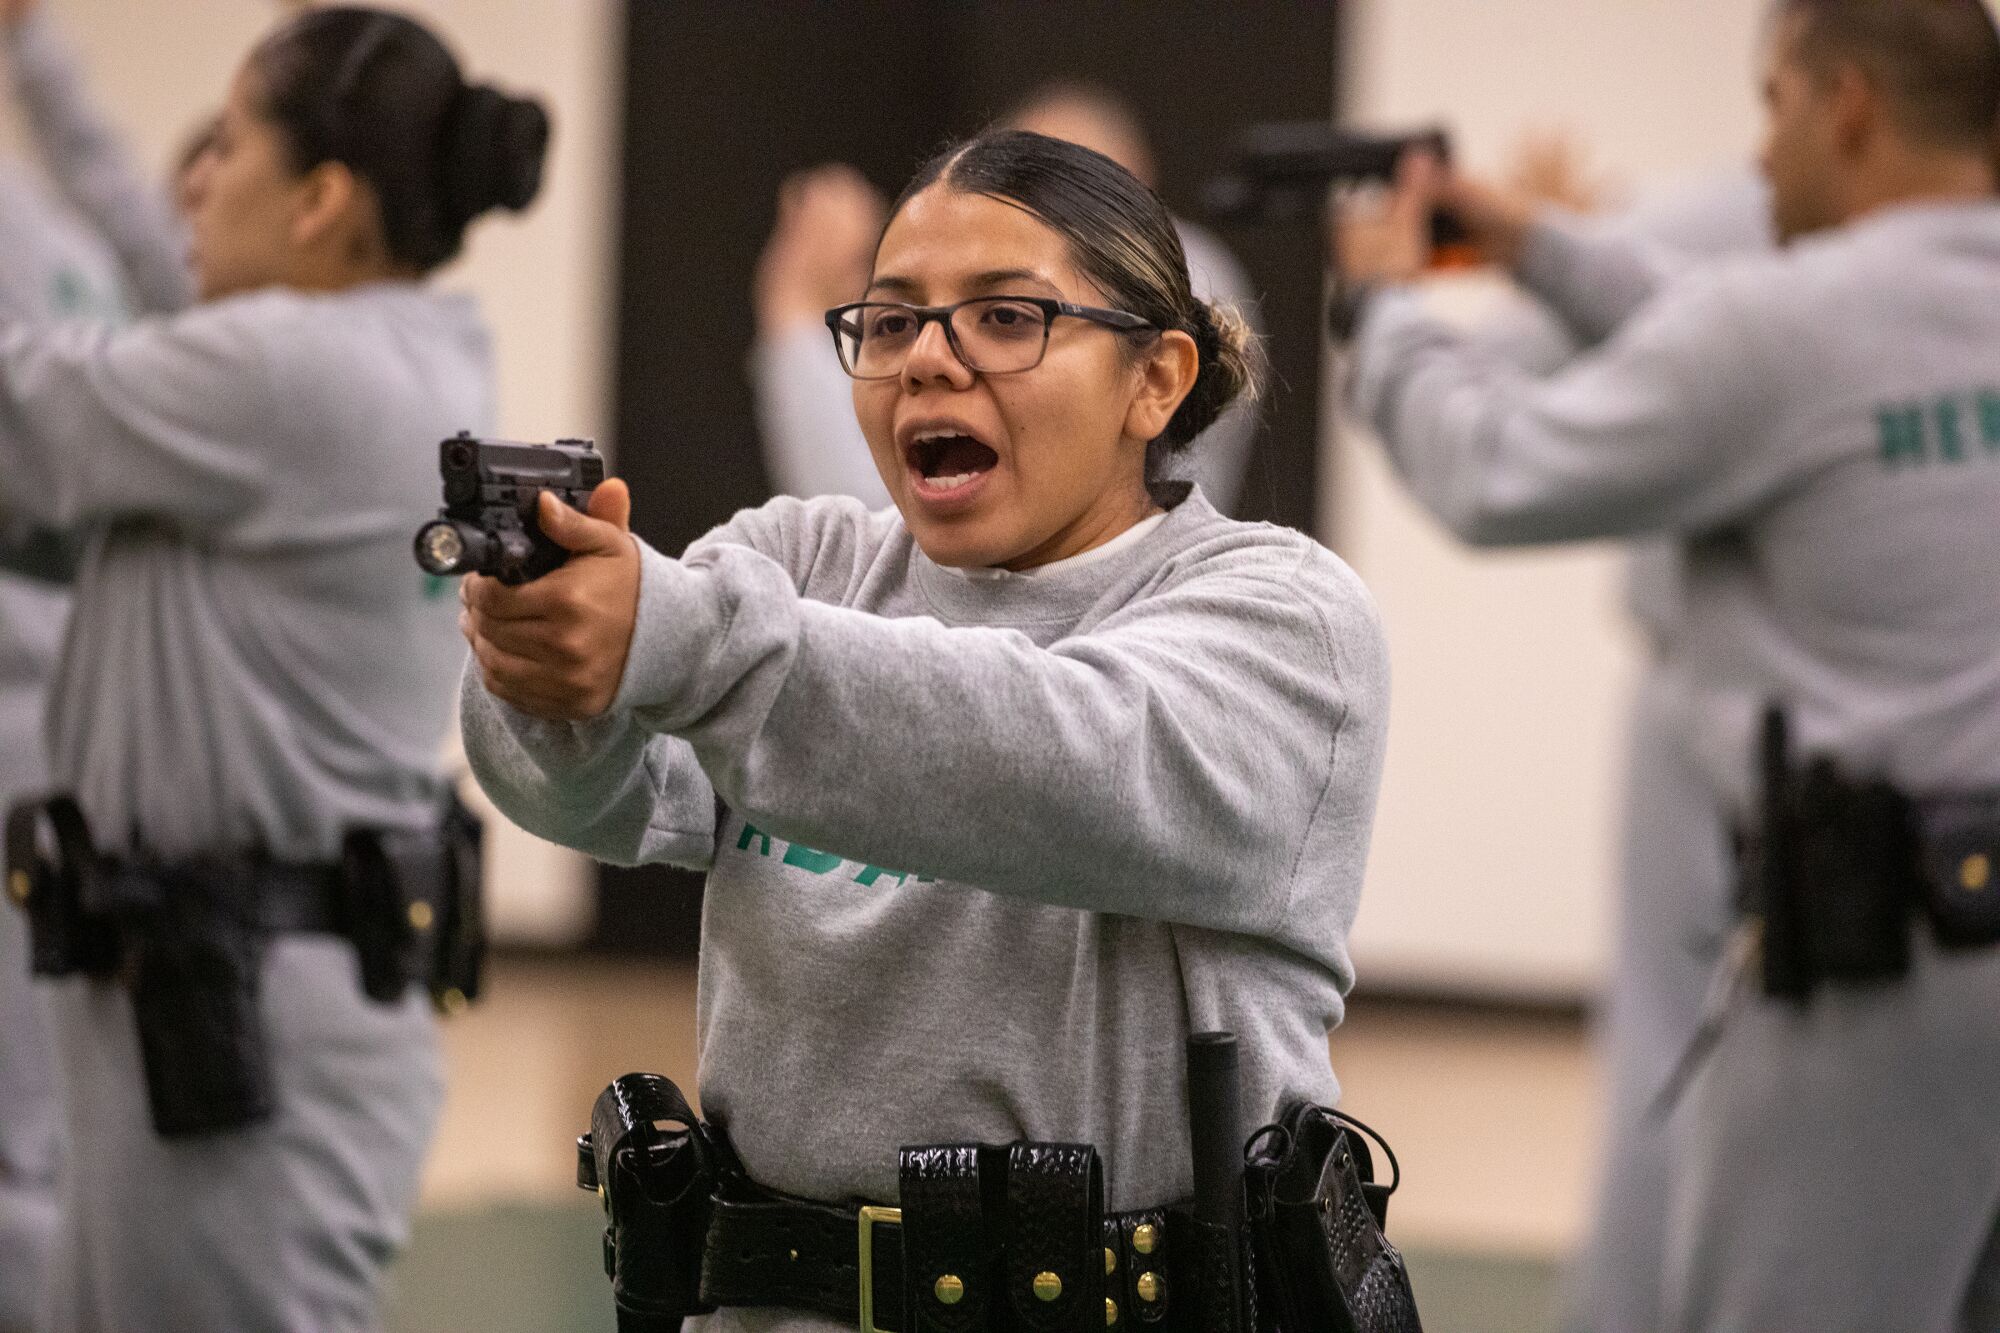 Recruits take a course in defensive tactics.